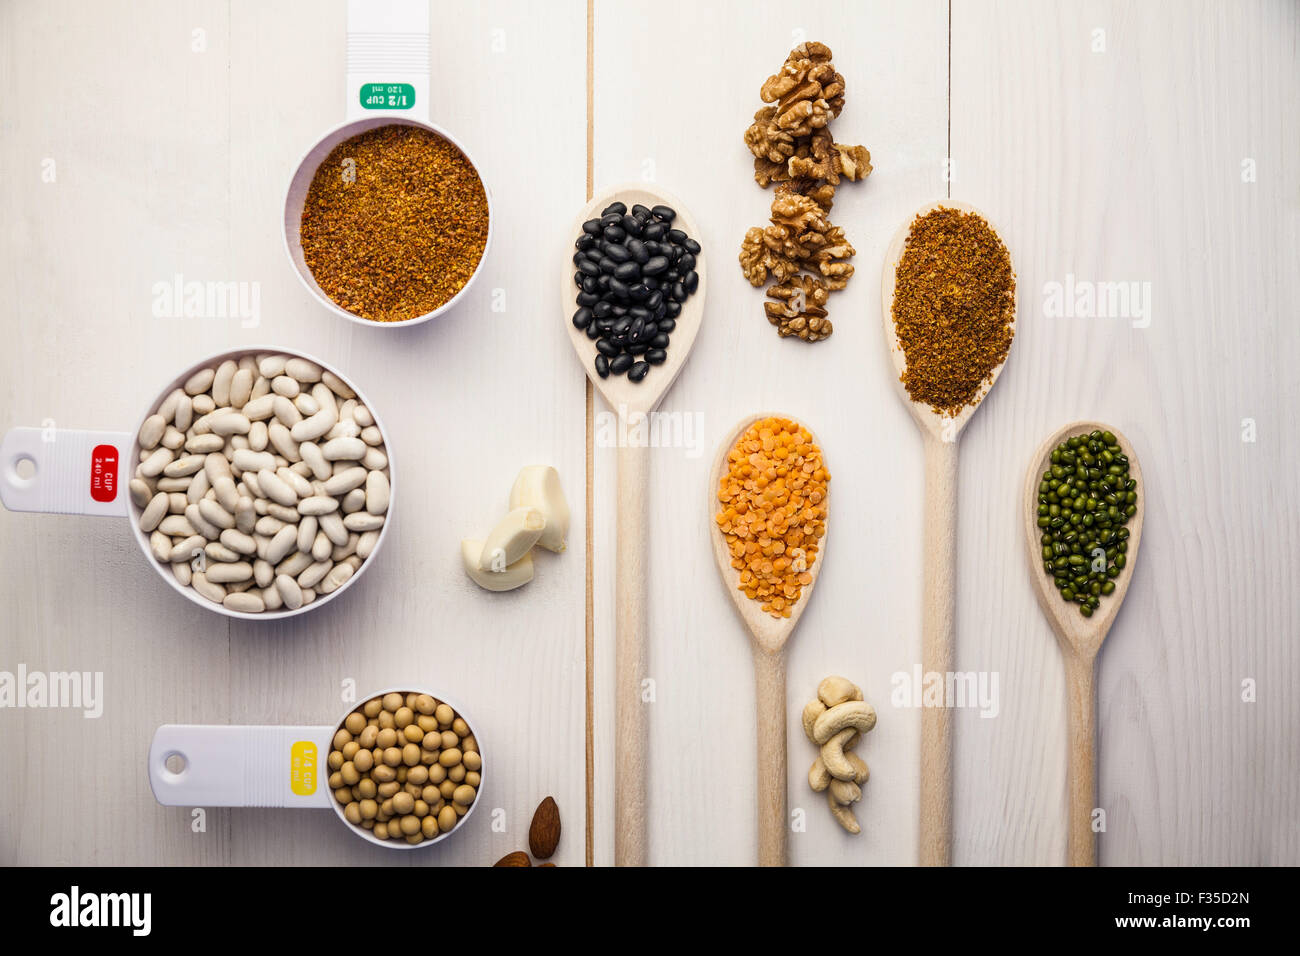 Spoons and cups of pulses and seeds Stock Photo